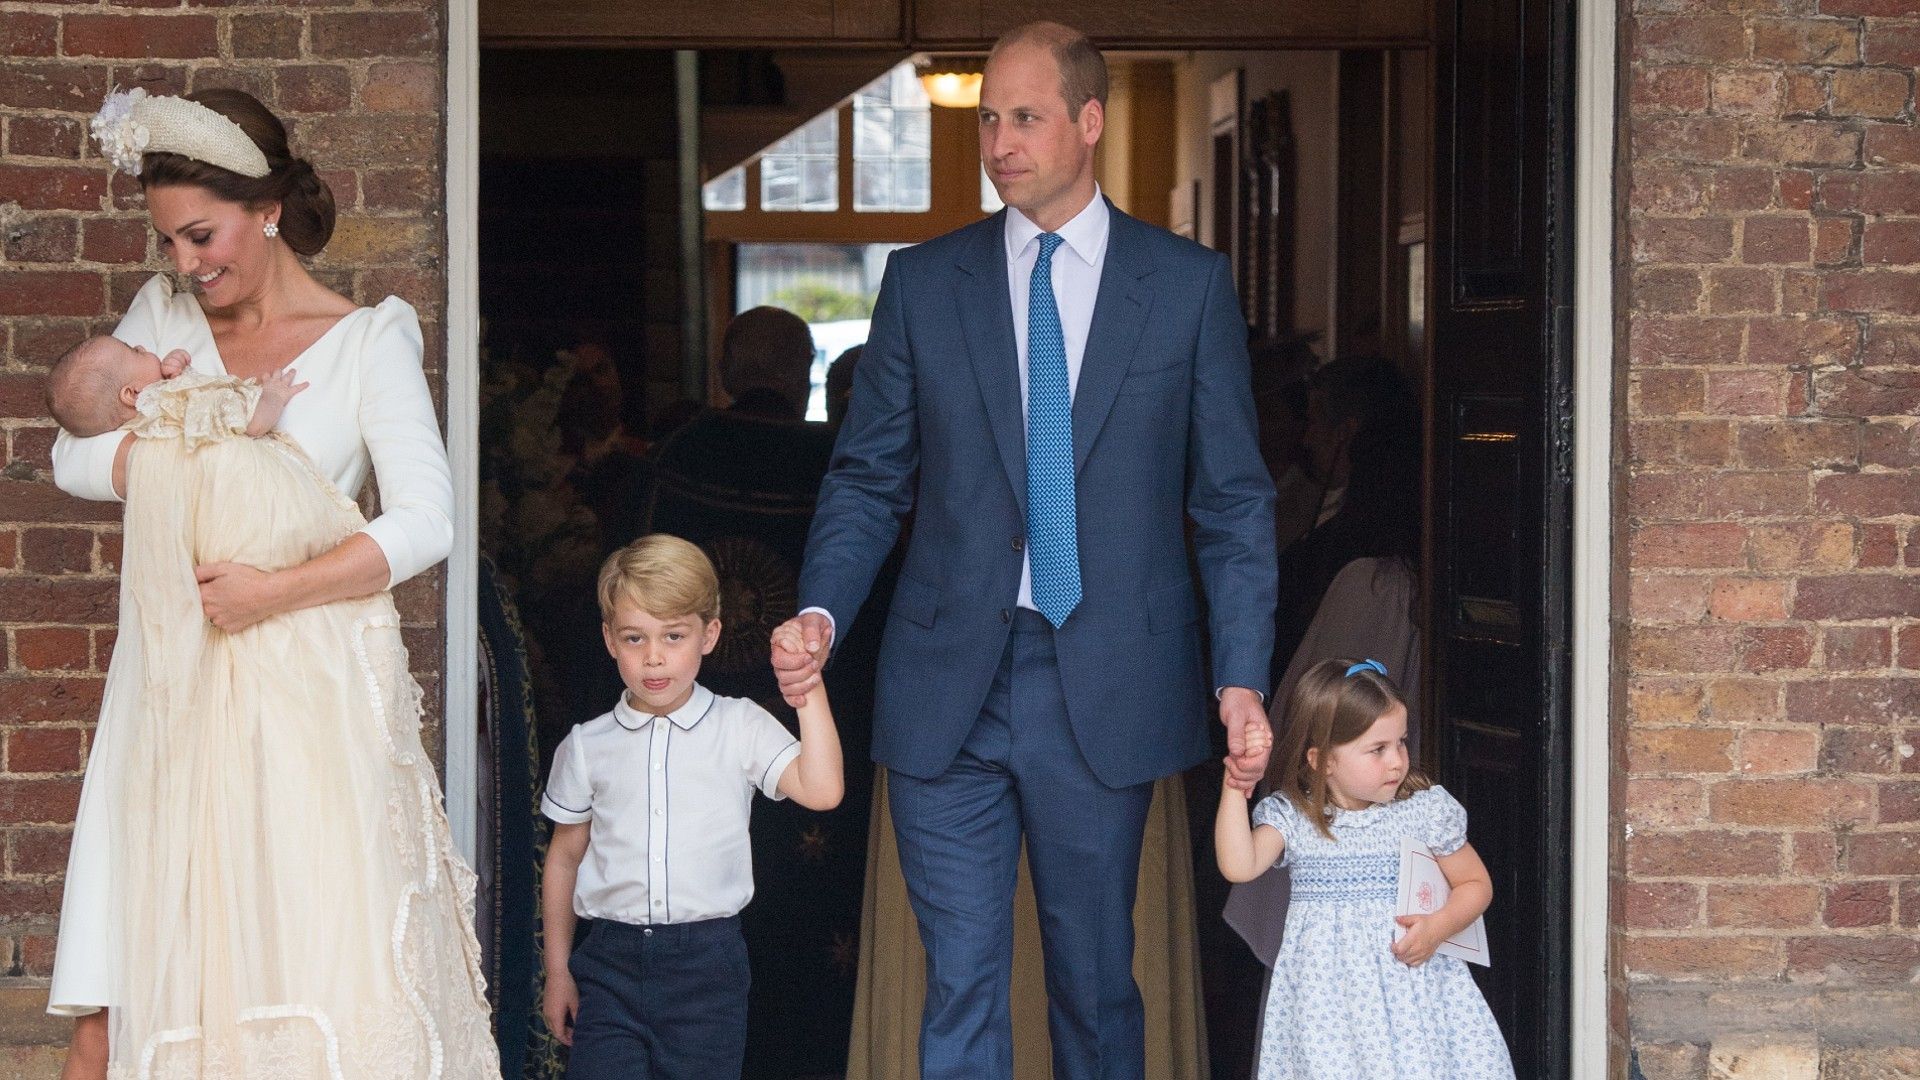 <p>                     While most of us have just one or two godparents (perhaps three, at a push), it has become tradition for members of the royal family to have a collection of multiple godparents – Prince George for example has seven, while Princess Charlotte has five, and Prince Louis and his father Prince William have six. Prince Harry also has six.                    </p>                                      <p>                     The reason for this is thought to be rooted in the idea that royal children will likely require plenty of help and guidance from trusted friends and family members as they go through their complex lives as royals – and so the more godparents there to help them with that, the better.                   </p>